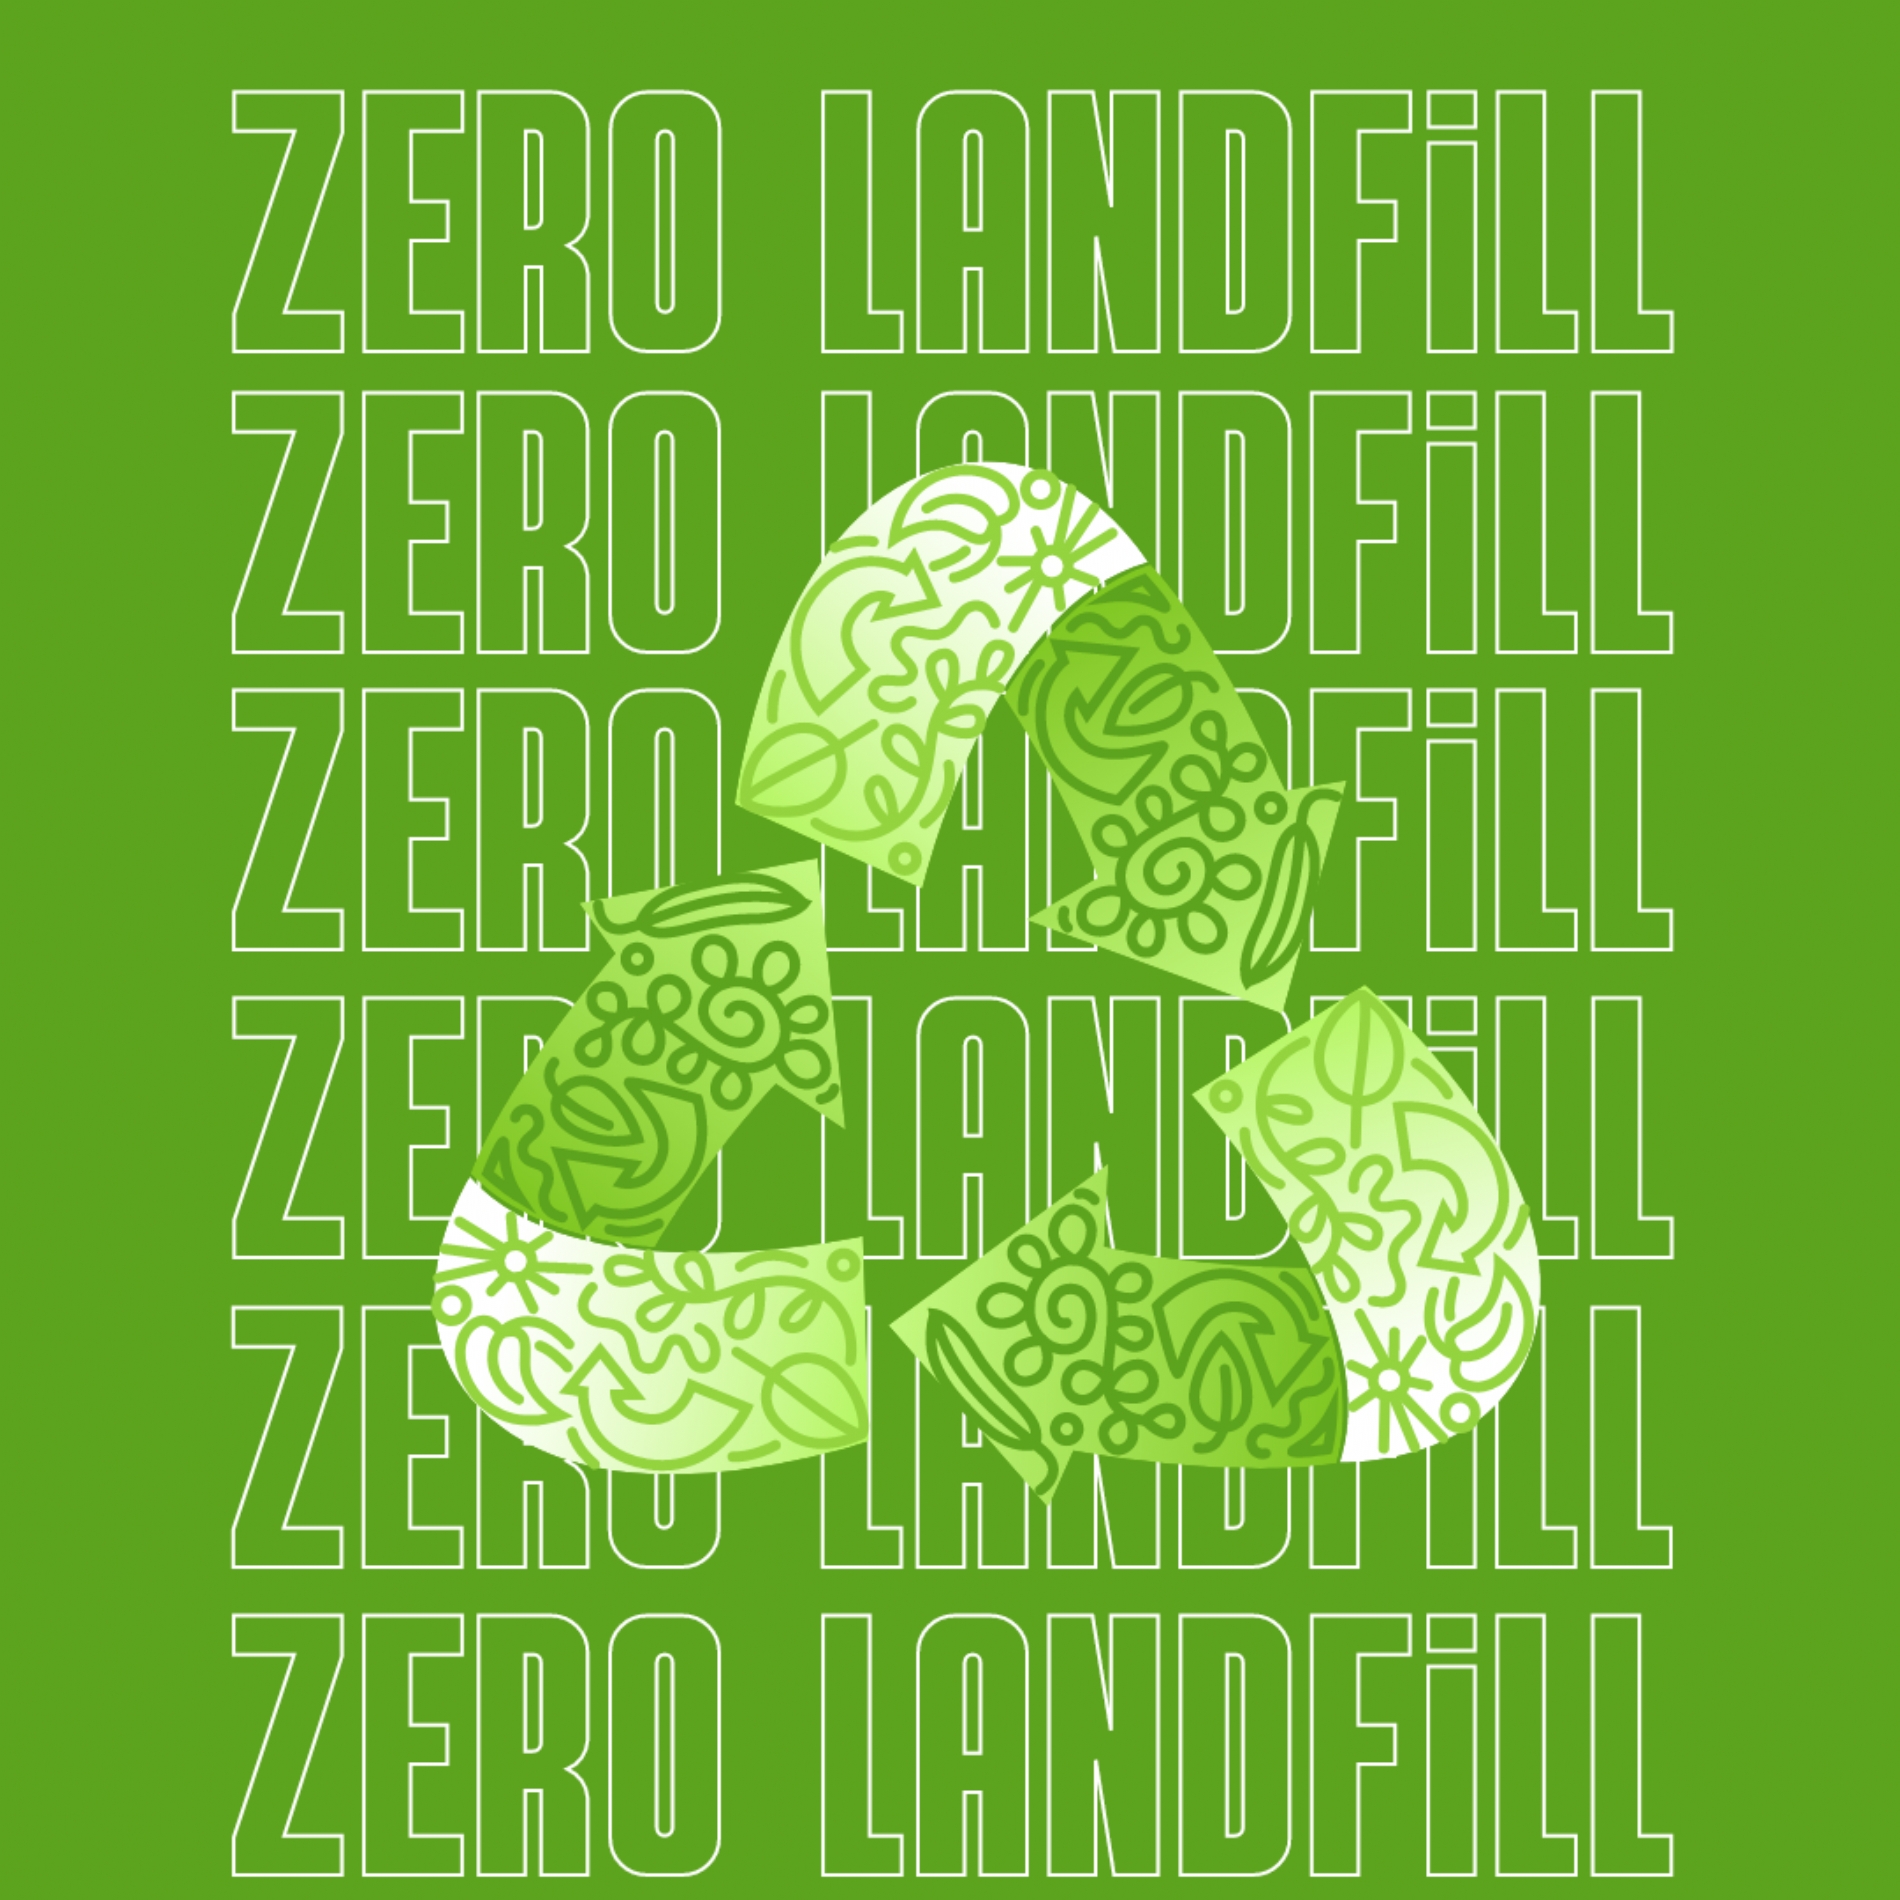 No Commercial Waste To Landfill 